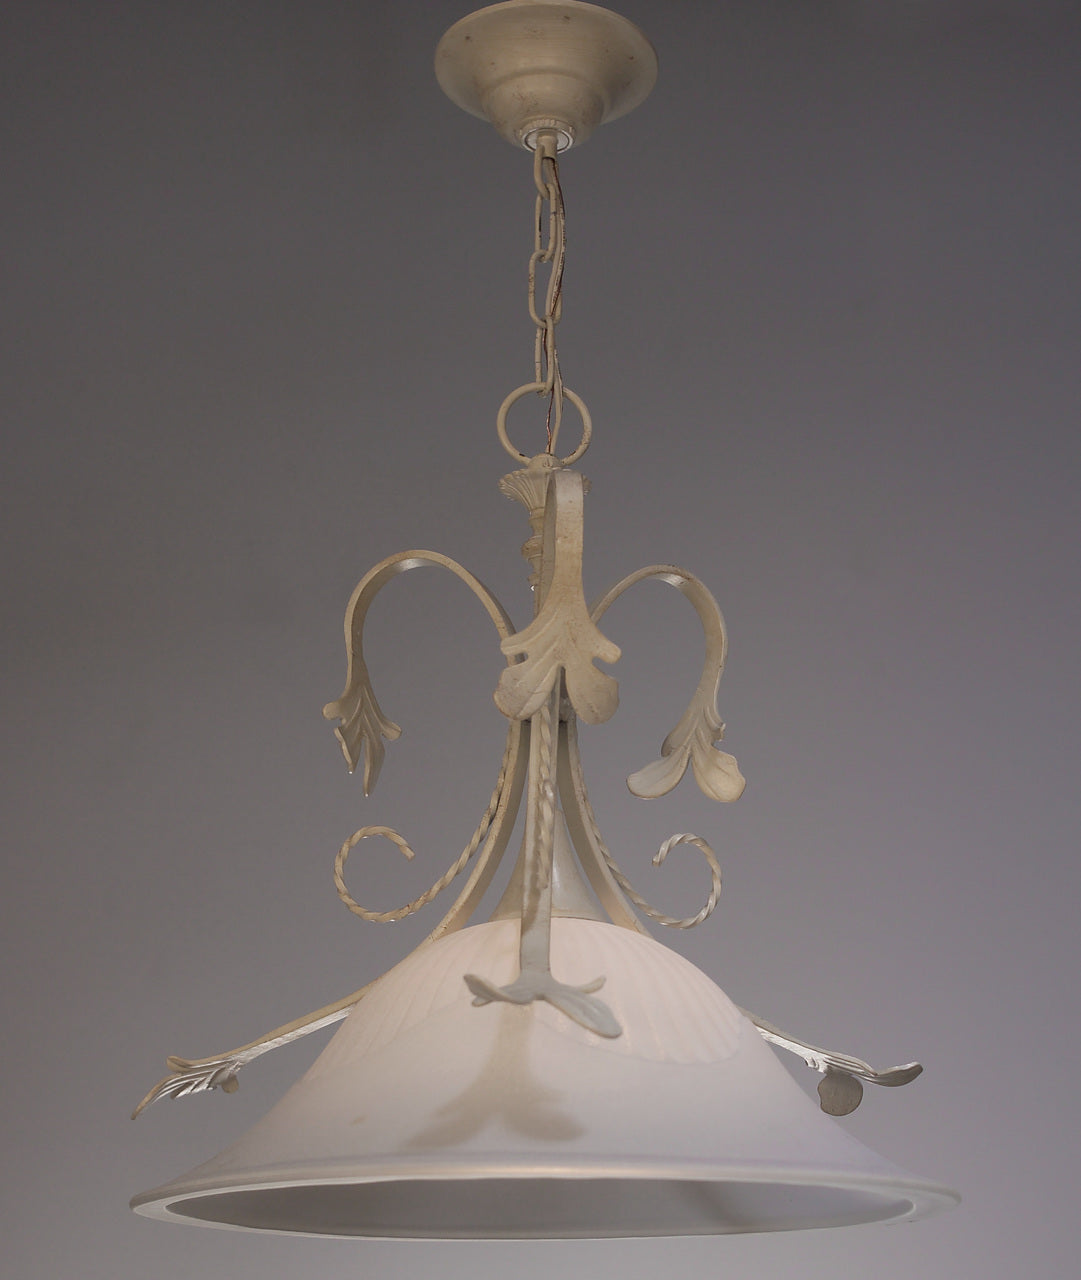 Classic Lighting 4111 I Treviso Wrought Iron Pendant in Ivory (Imported from Italy)